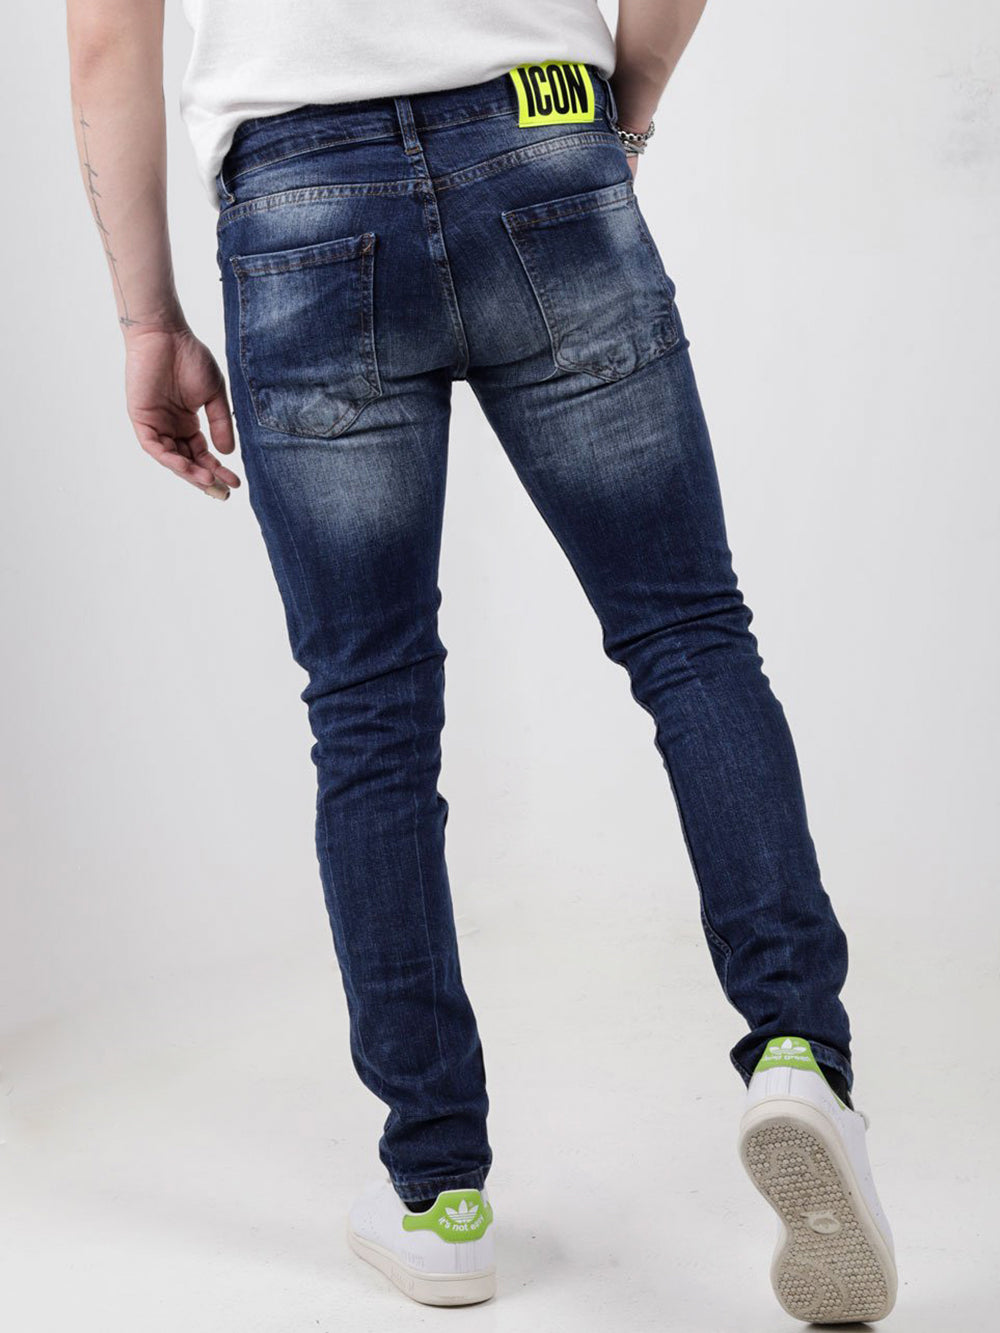 The back of a man wearing blue jeans and white sneakers PHOSPHORUS.